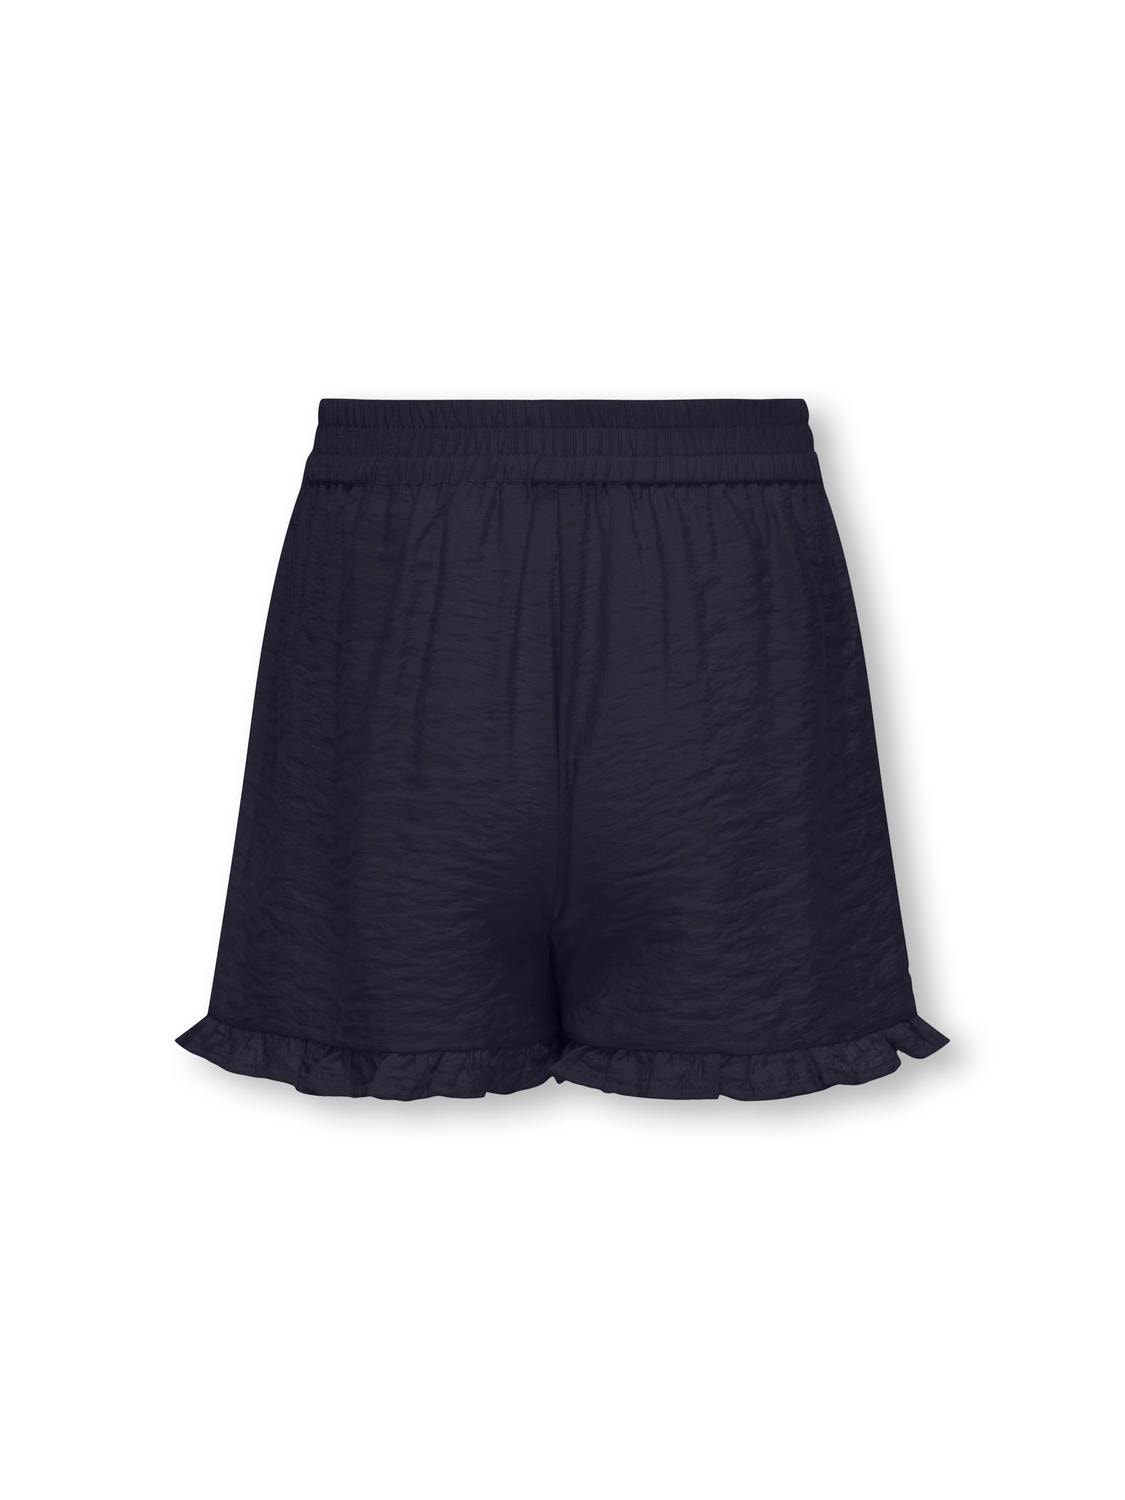 ONLY Shorts with frill edge -Night Sky - 15296962